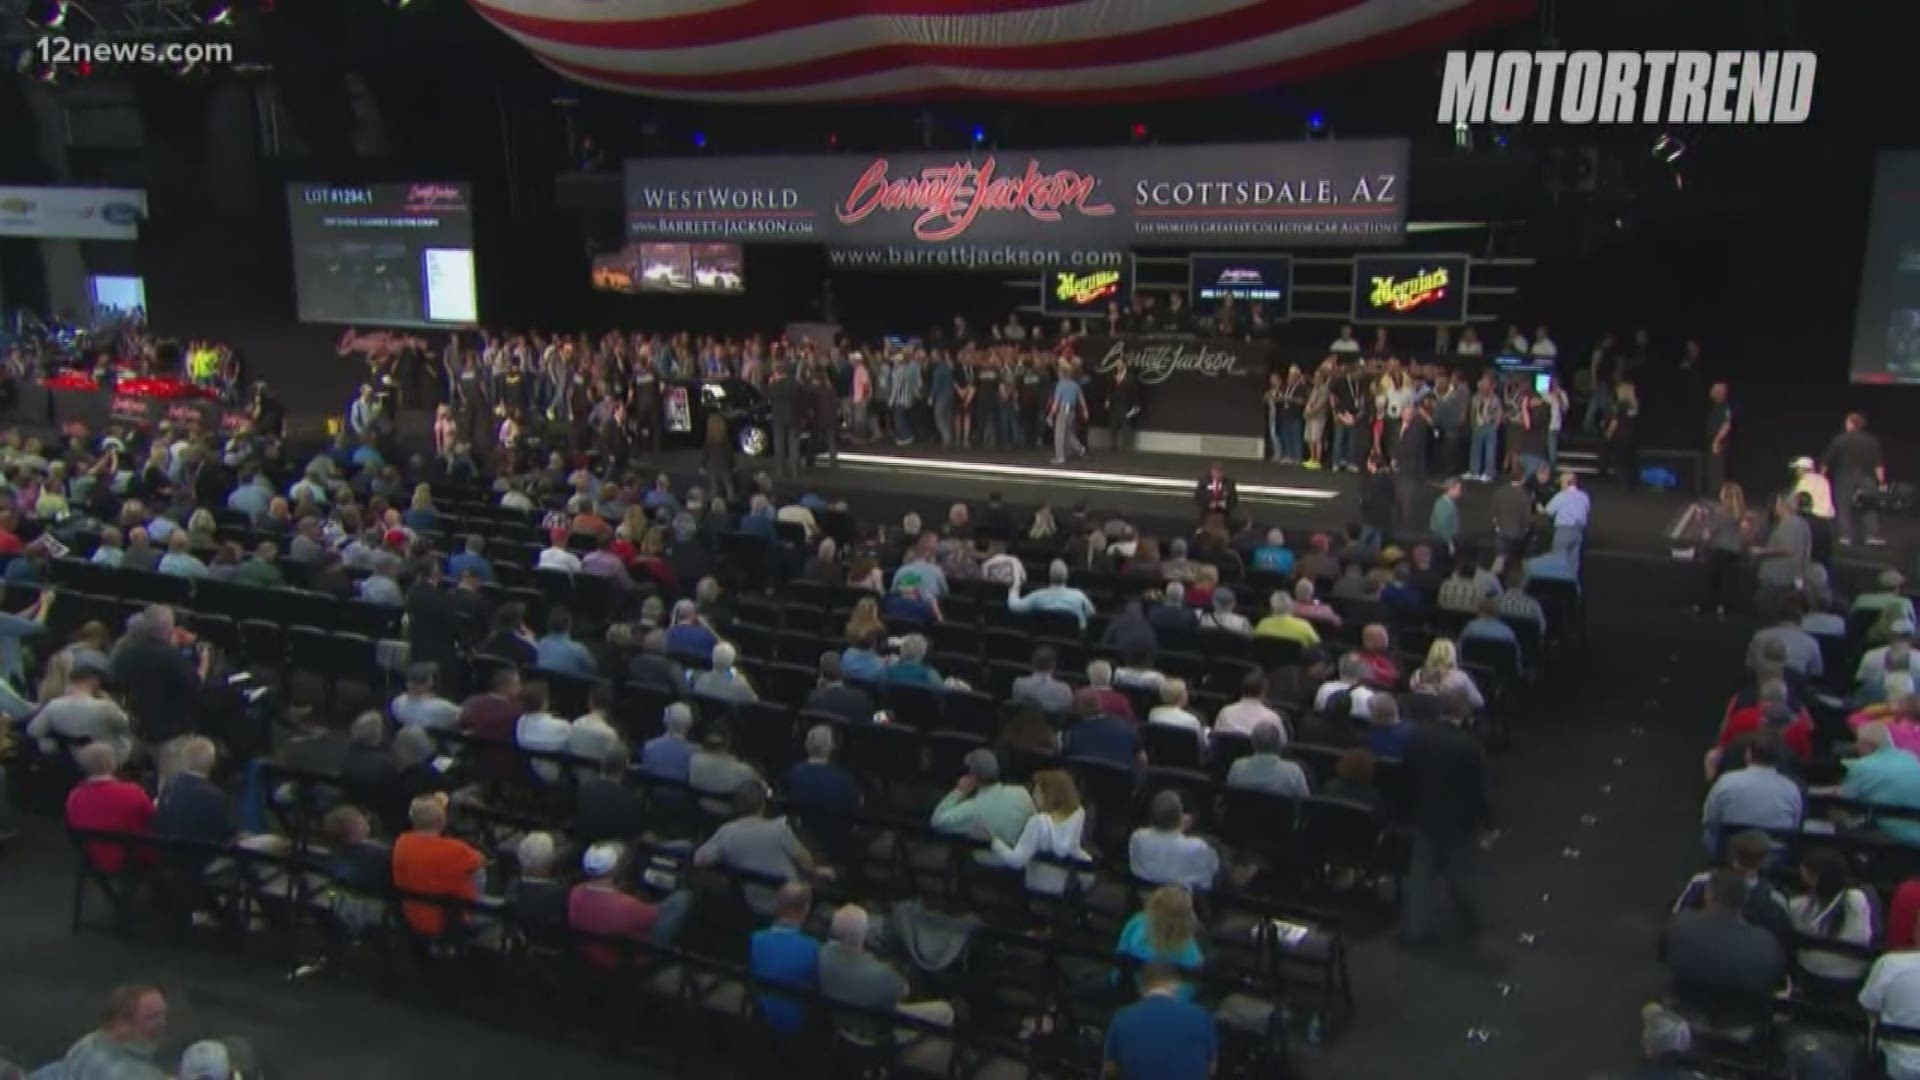 The famed Barrett-Jackson auction is coming to Scottsdale next weekend. Team 12's Matt Yurus has the latest.